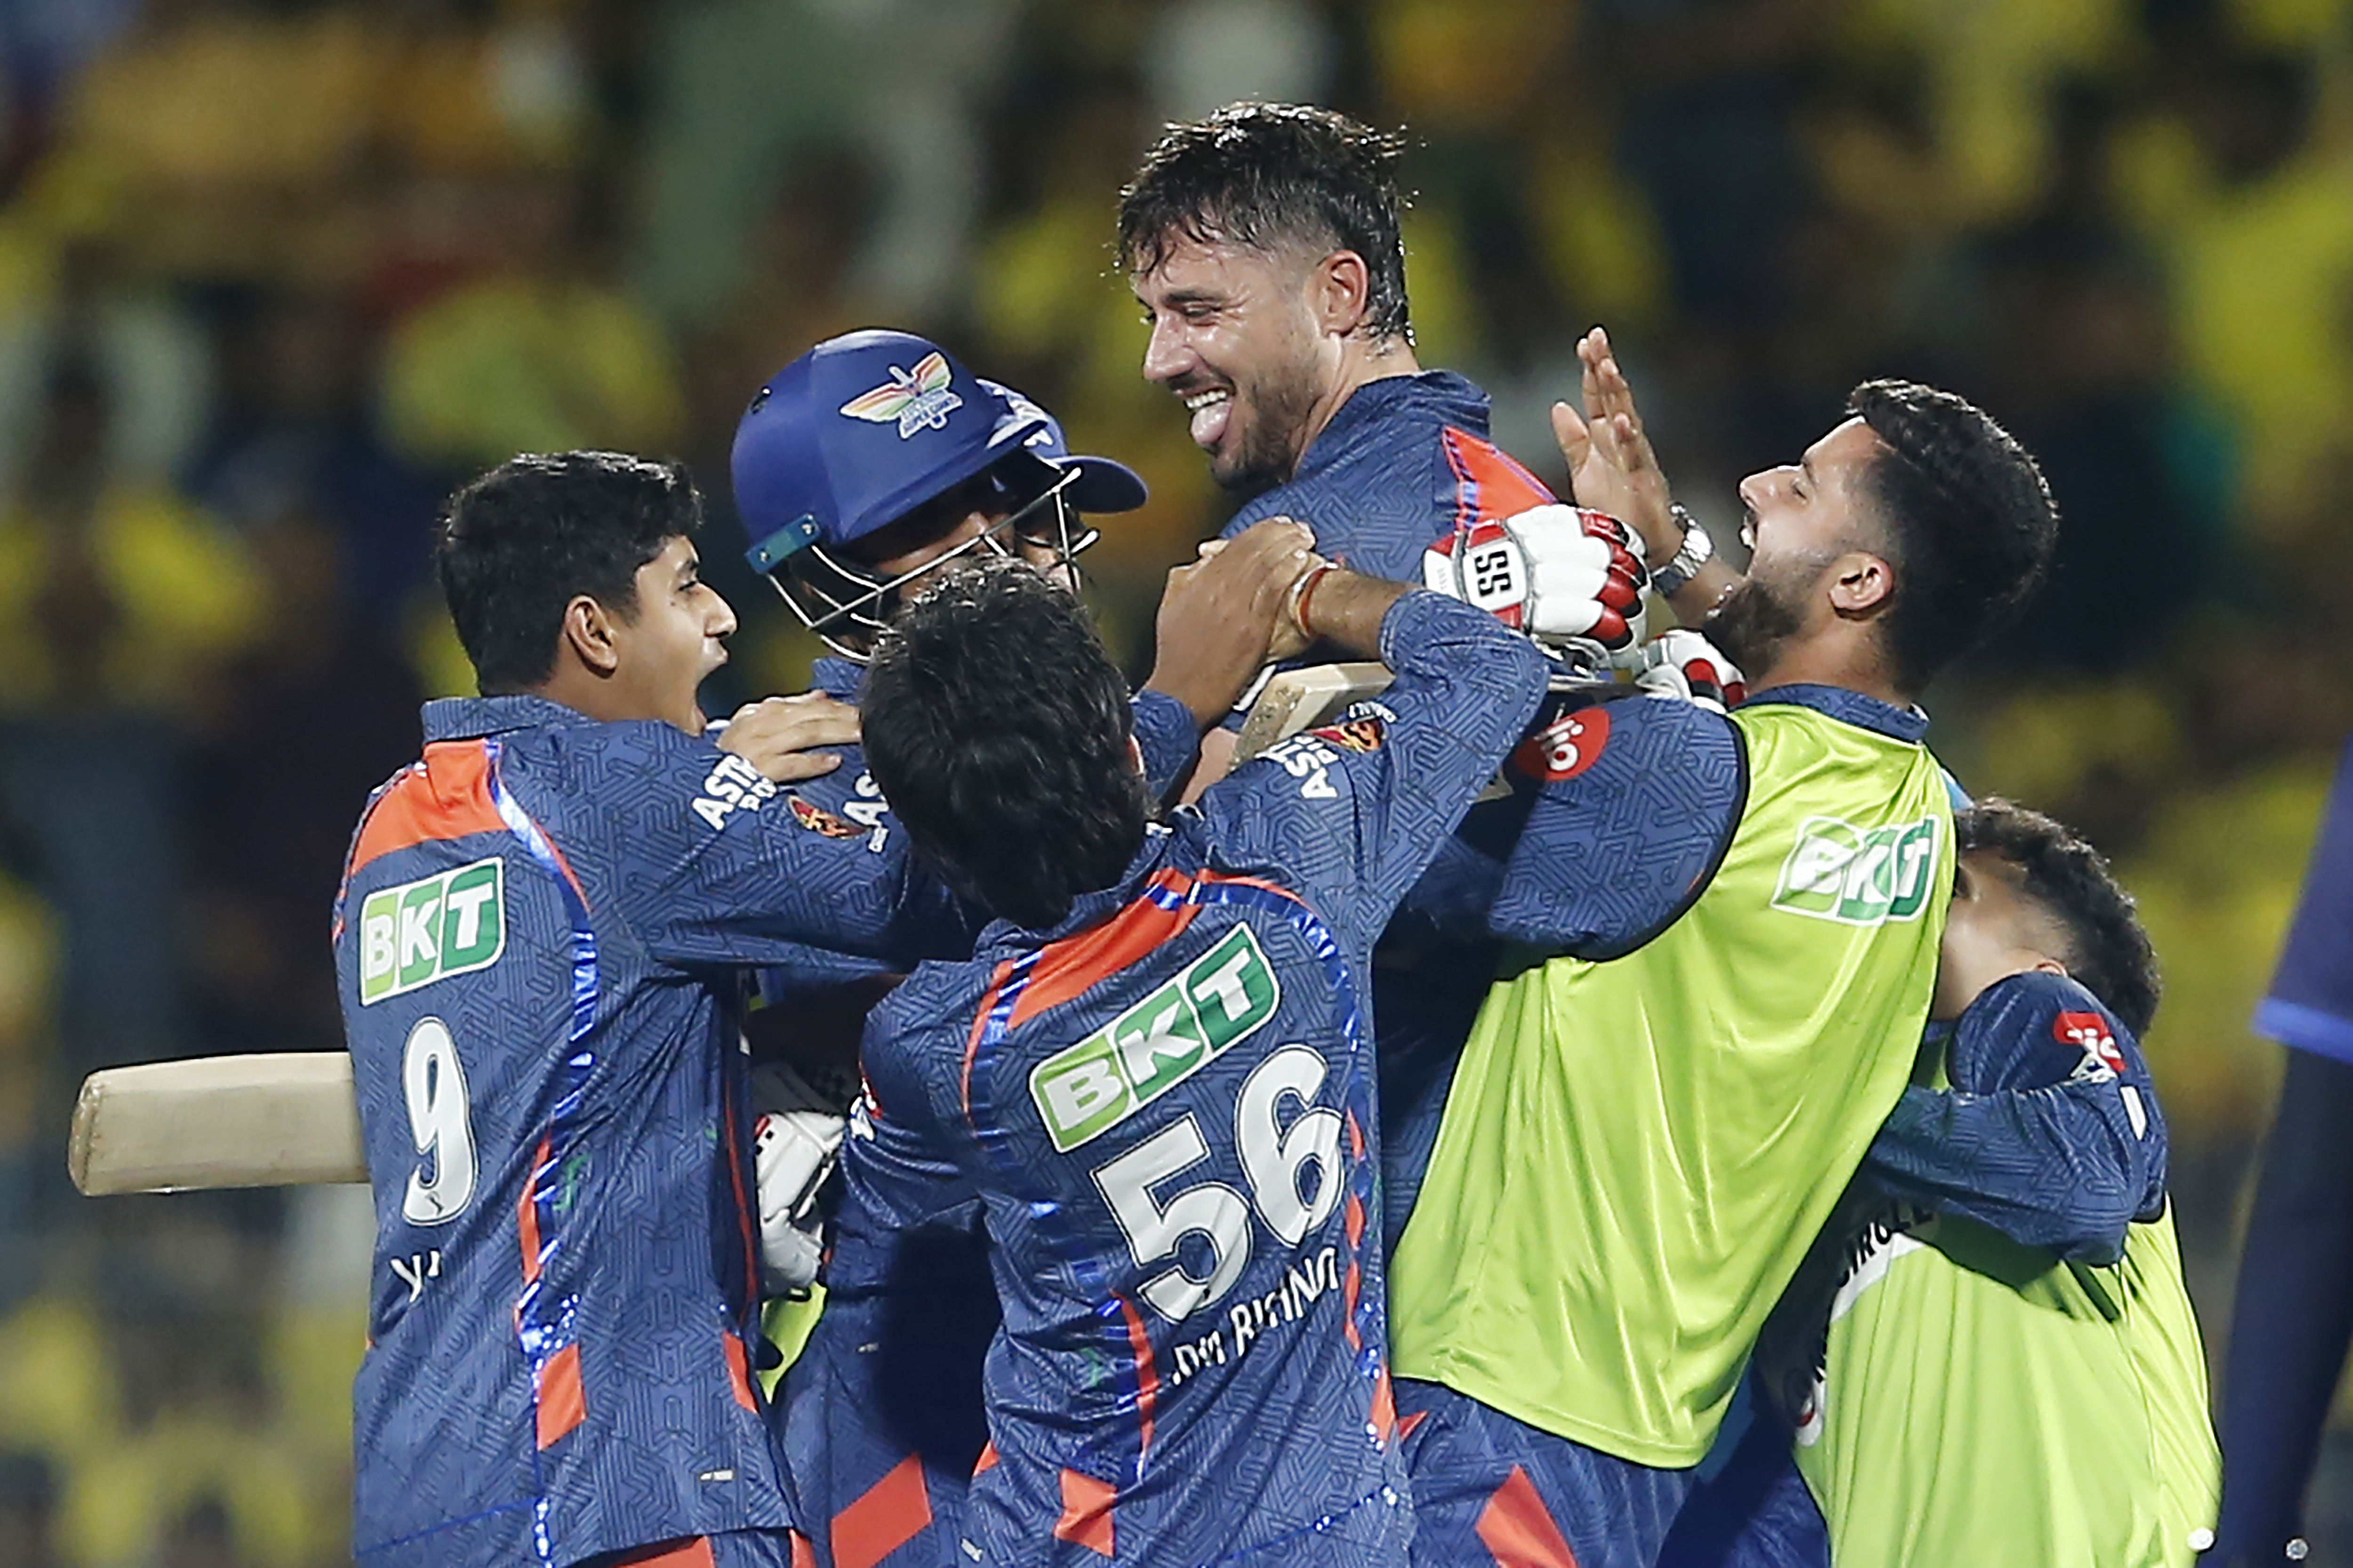 Lucknow Super Giants' team members lift Marcus Stoinis as they celebrate their win in the Indian Premier League over the Chennai Super Kings.